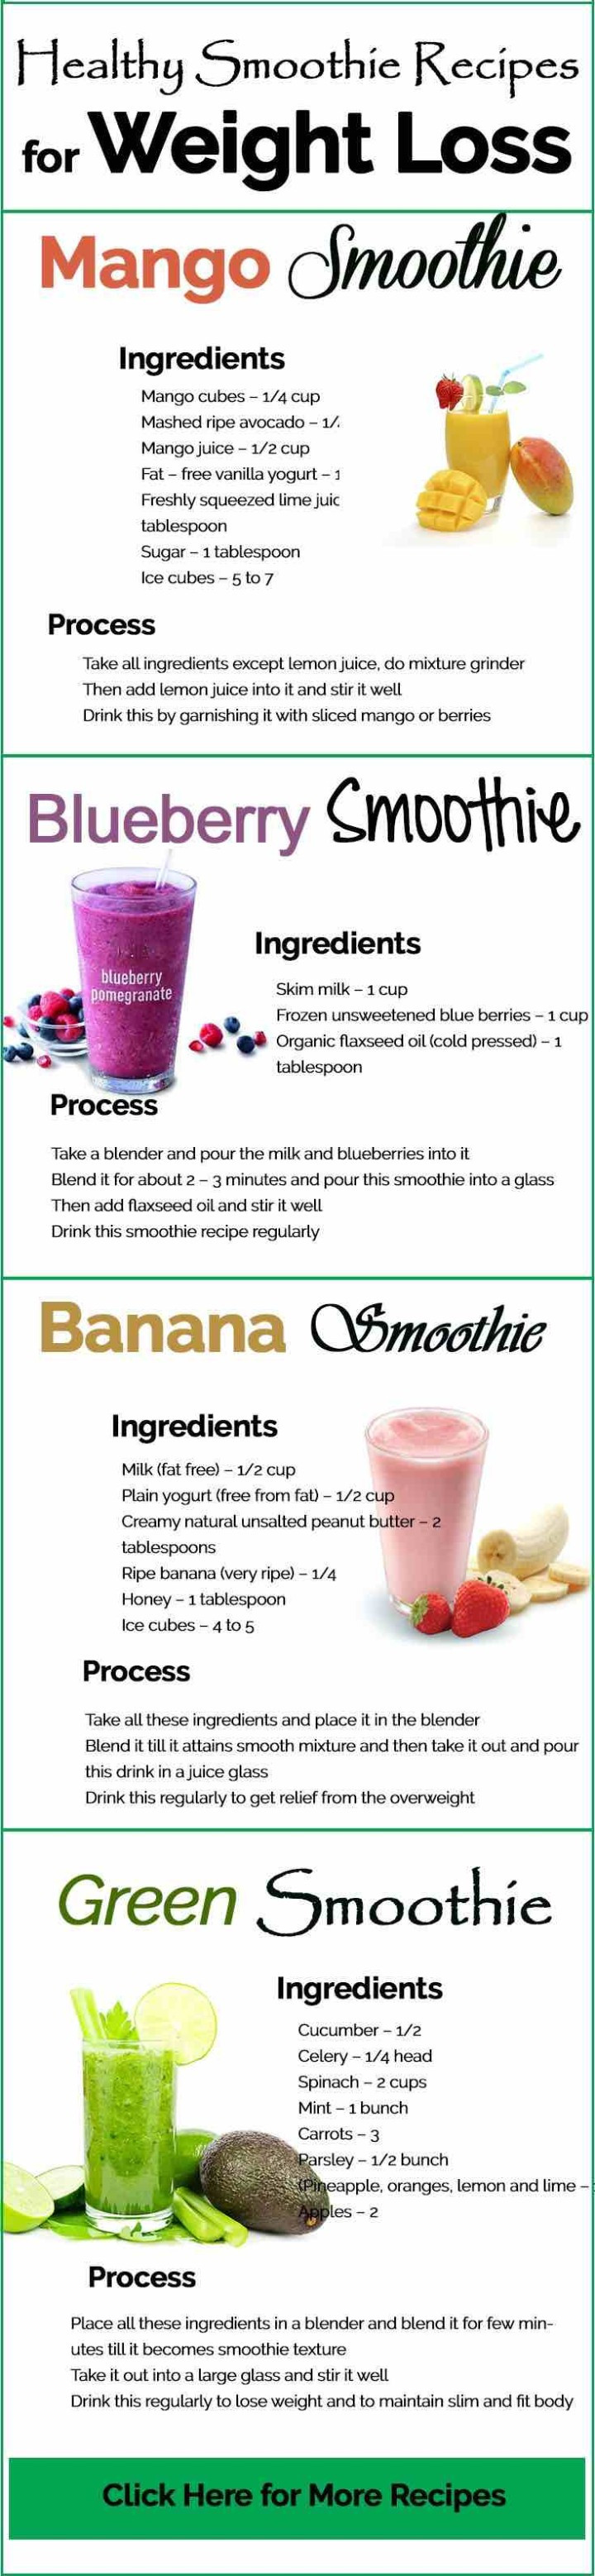 Healthy Fruit Smoothie Recipes for Weight Loss 20 Ideas for Juicing Recipes for Detoxing and Weight Loss Modwedding